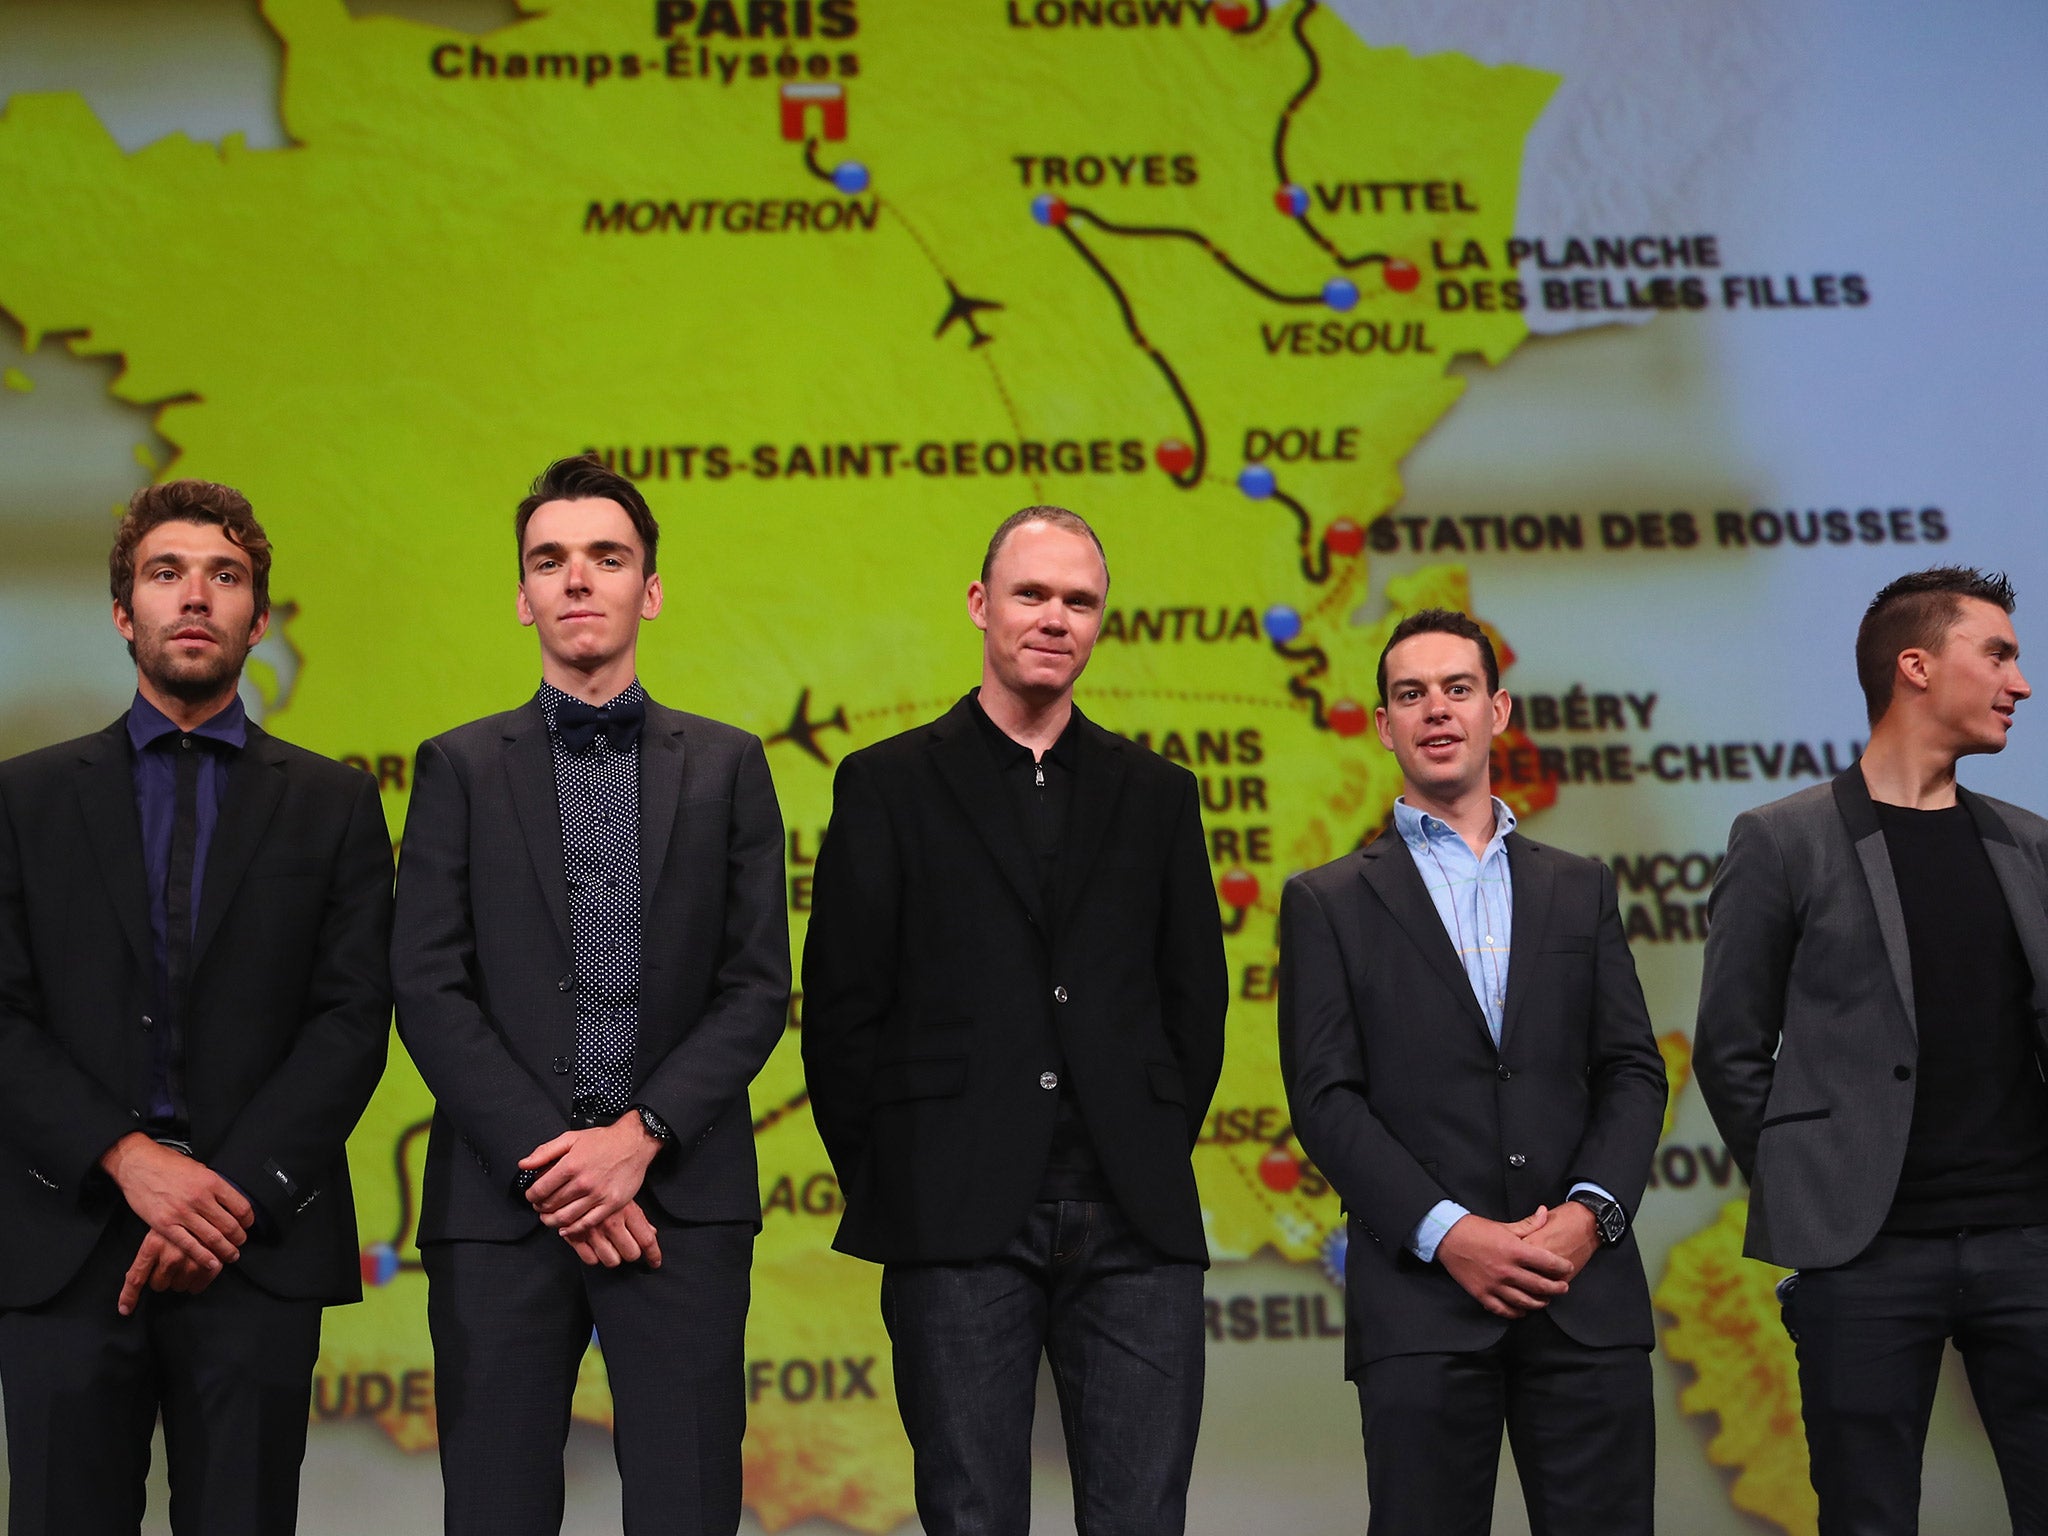 Thibaut Pinot, Romain Bardet, Chris Froome, Richie Porte and Julian Alaphilippe will all look to compete in 2017